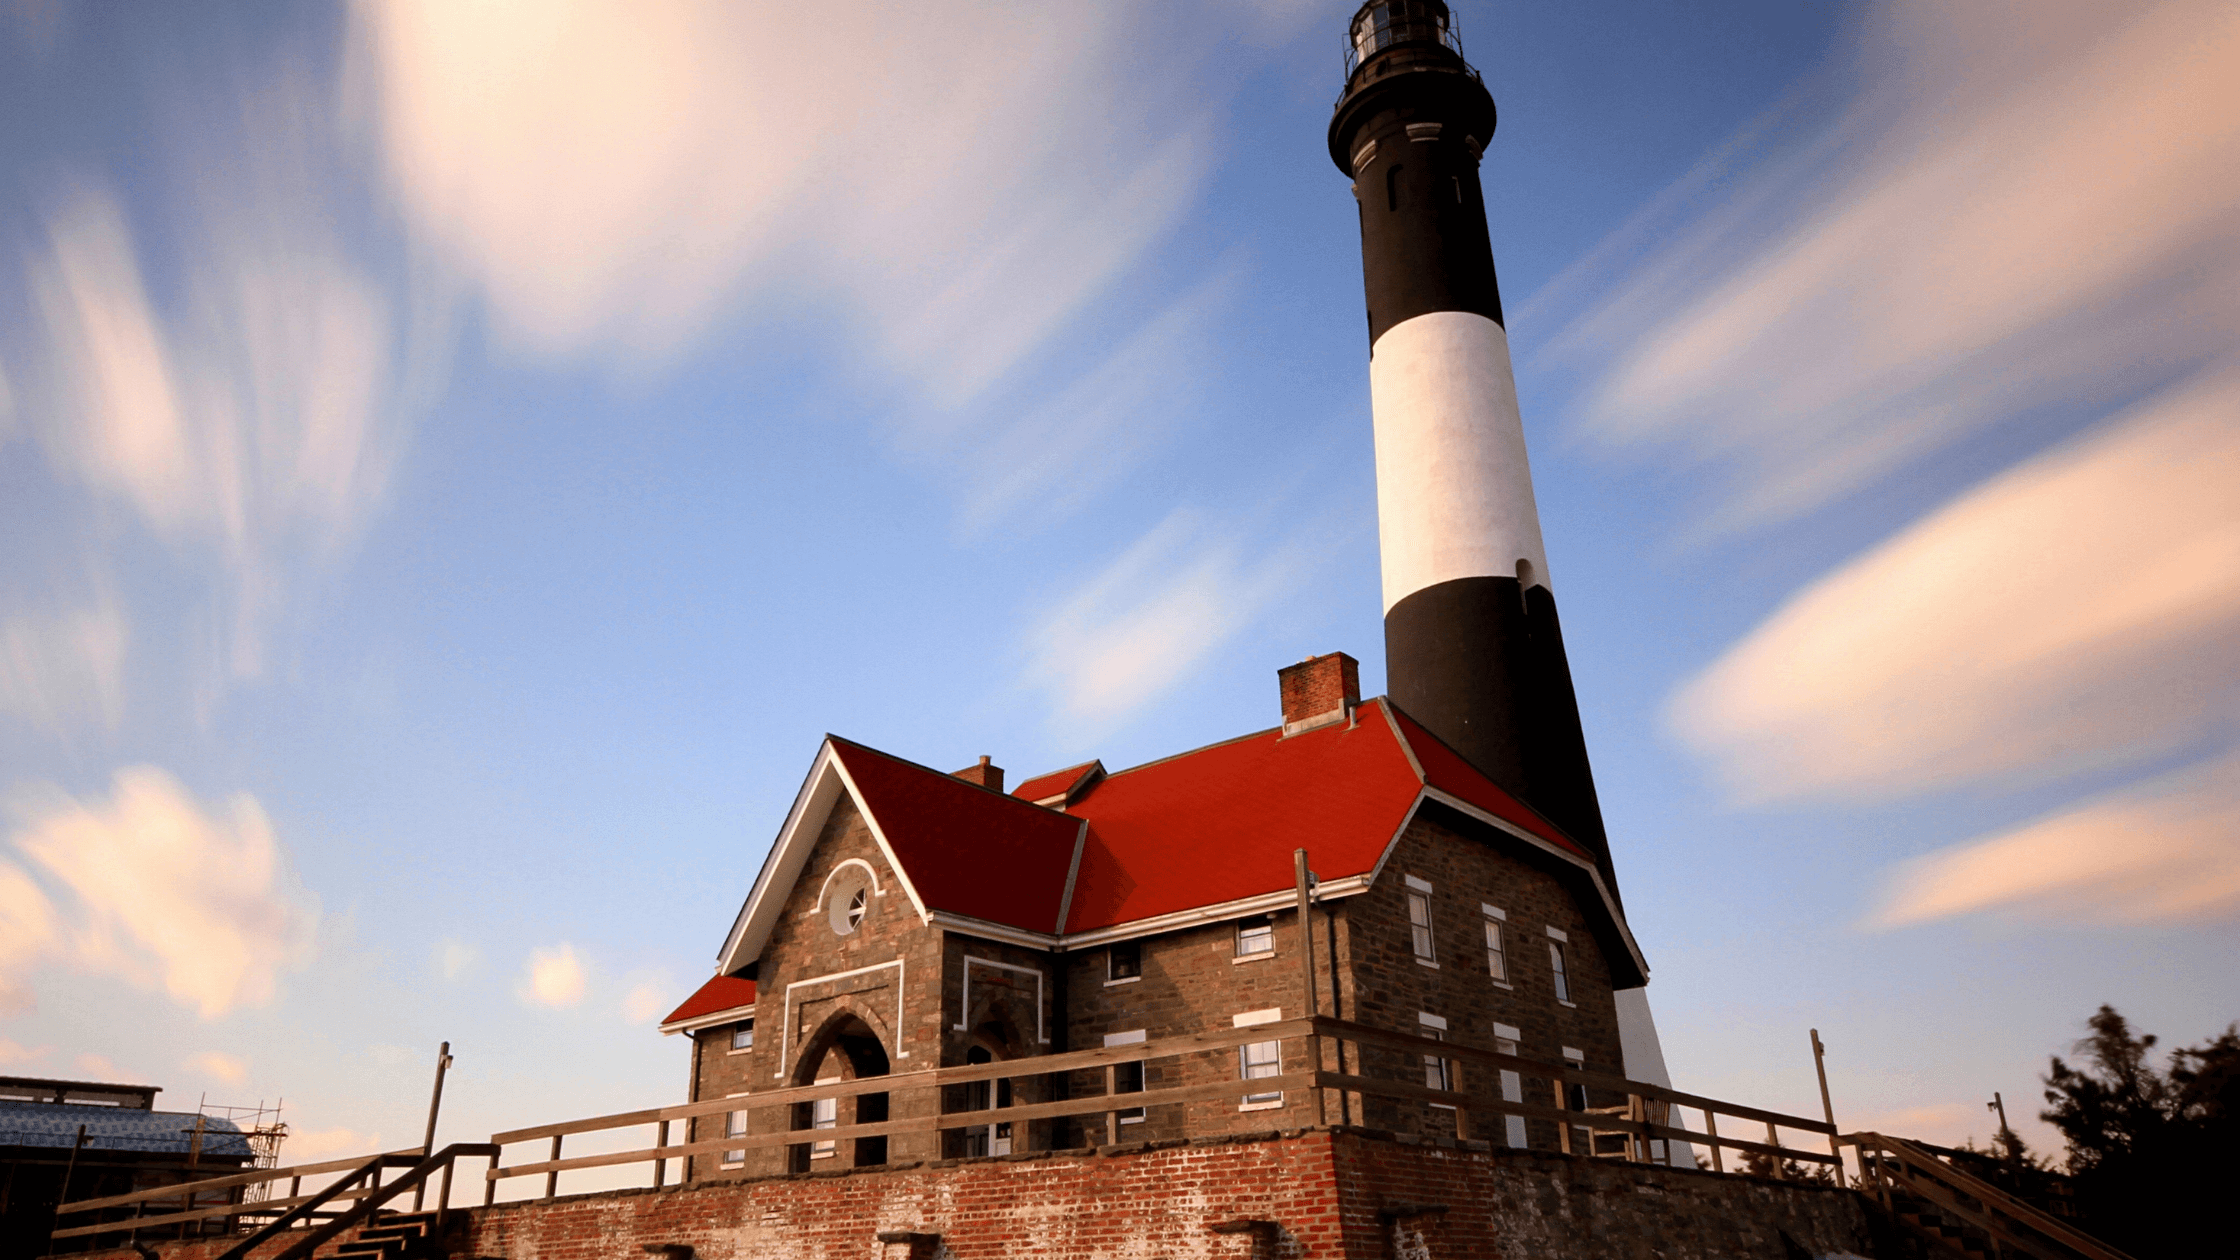 Guide to Fire Island